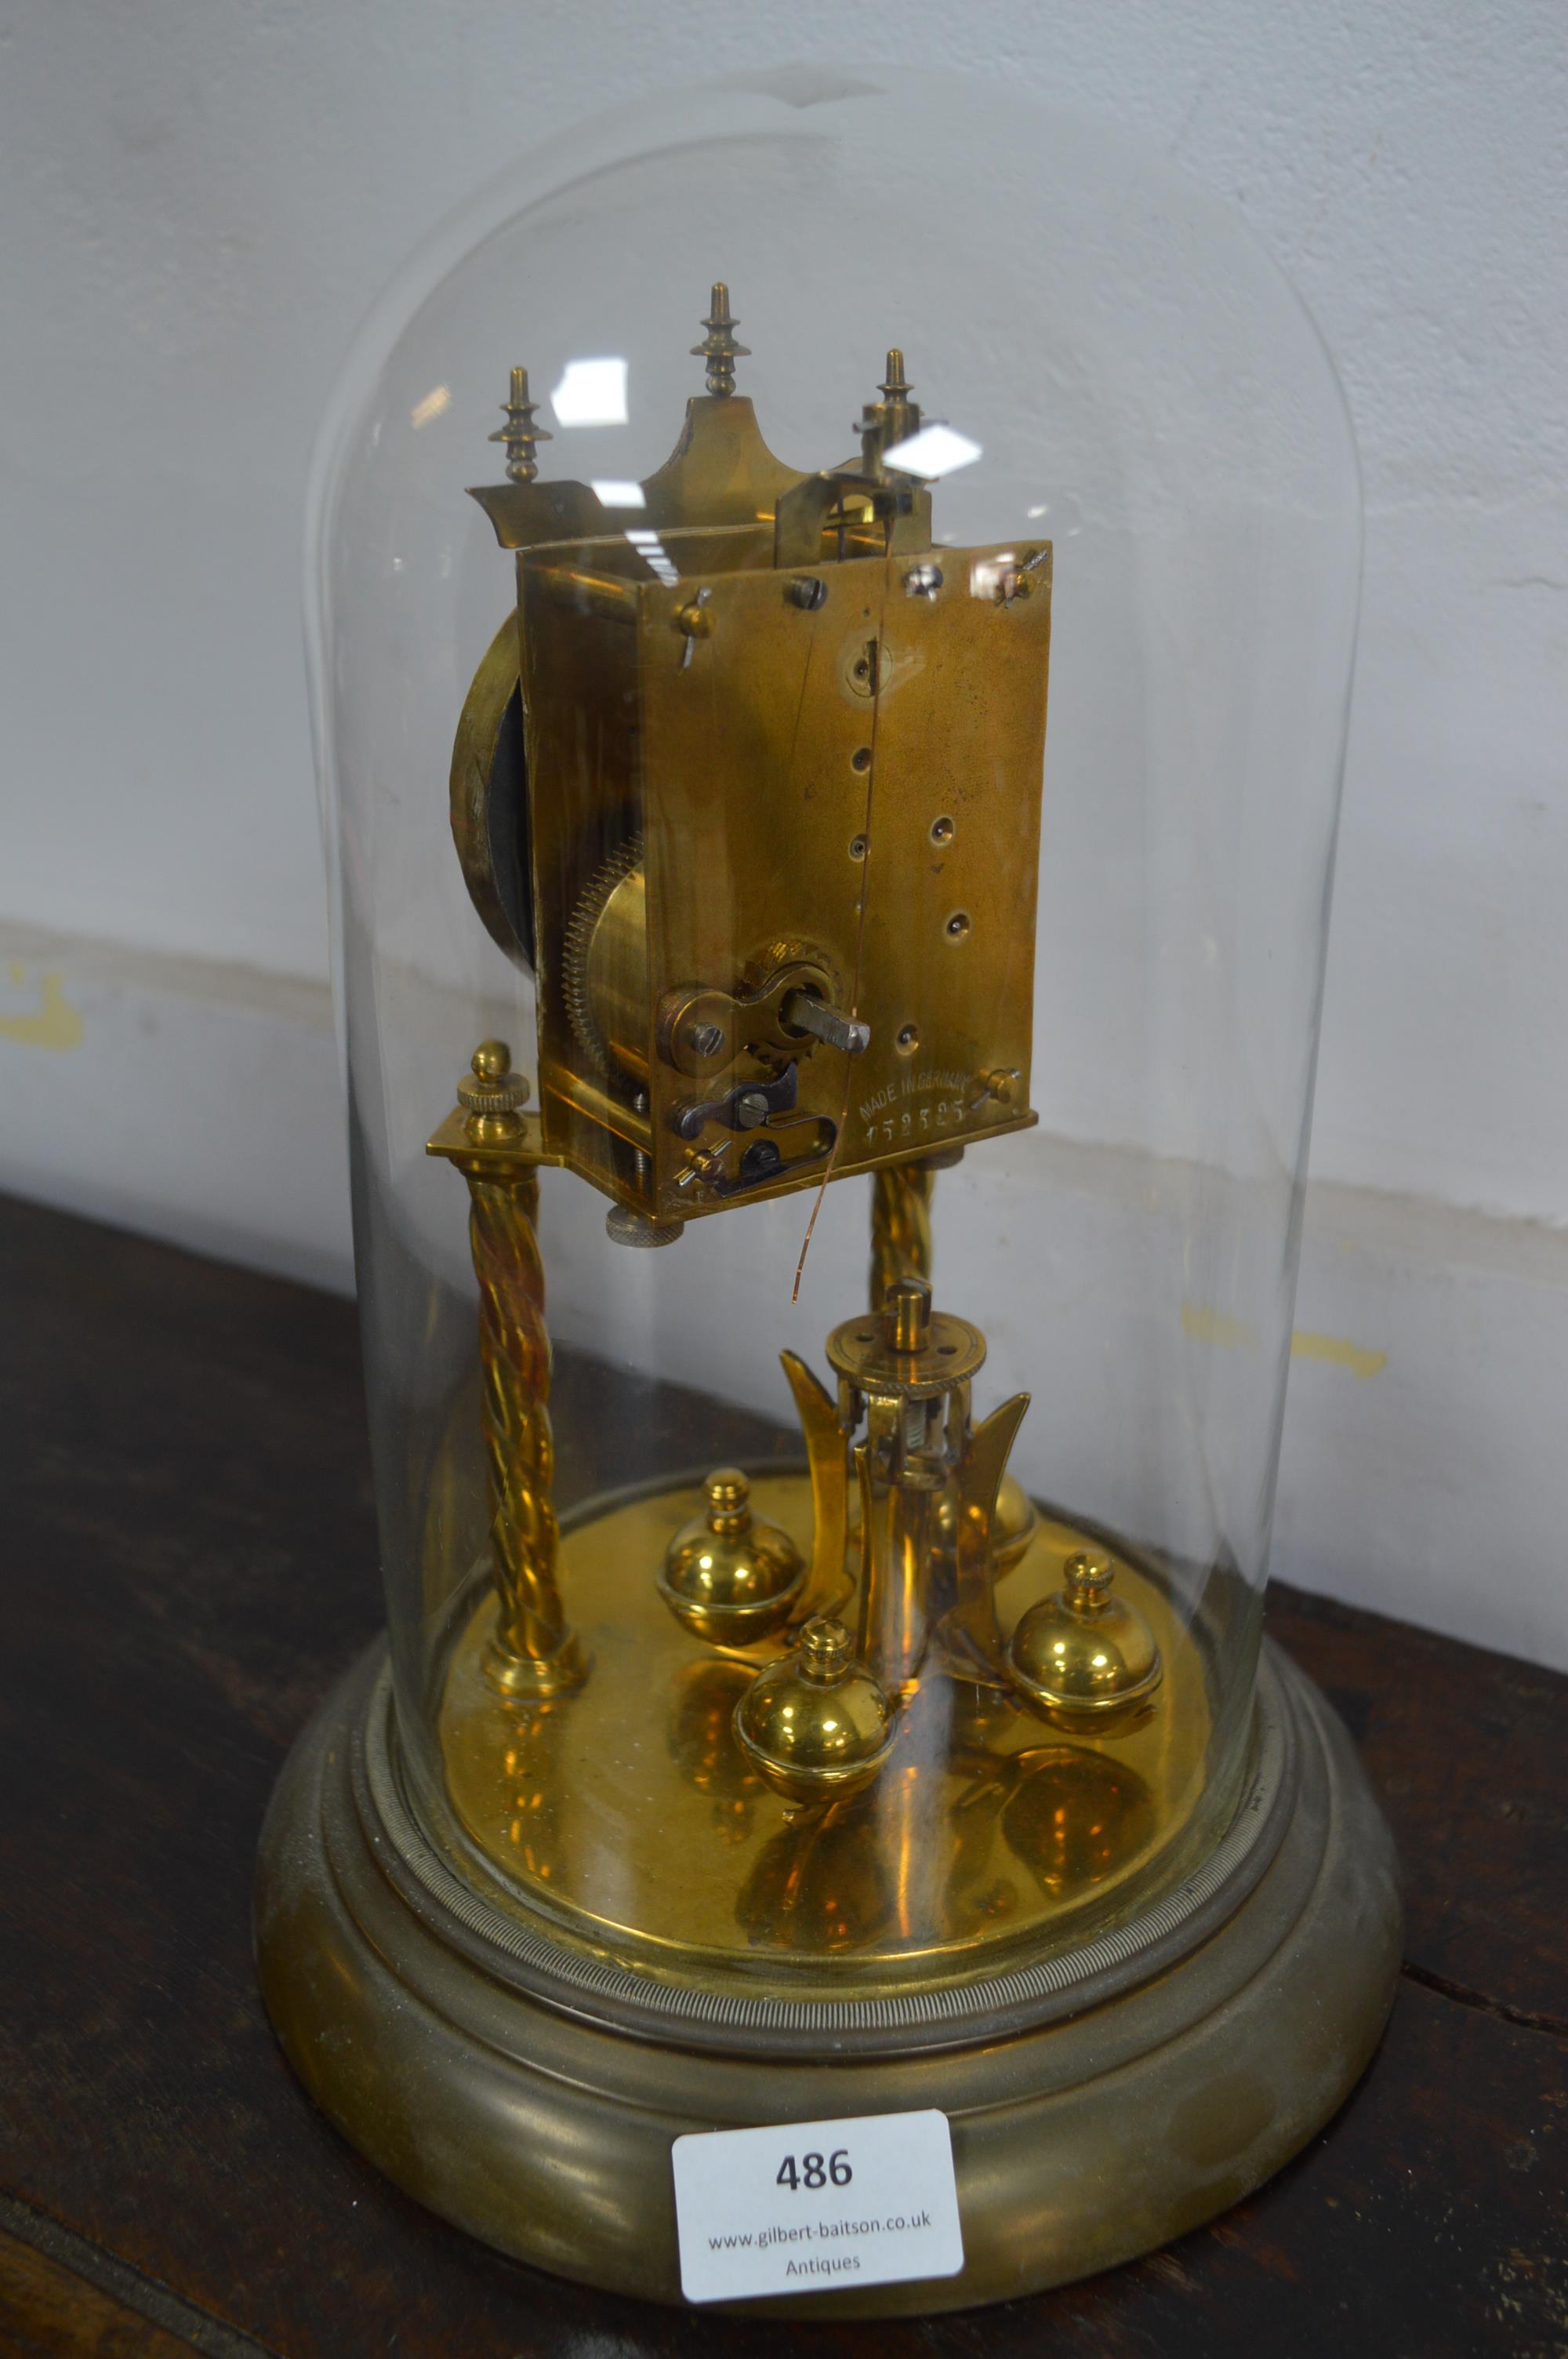 19th Century Round Glass Dome Clock with 7 Day Movement (AF) - Image 2 of 2